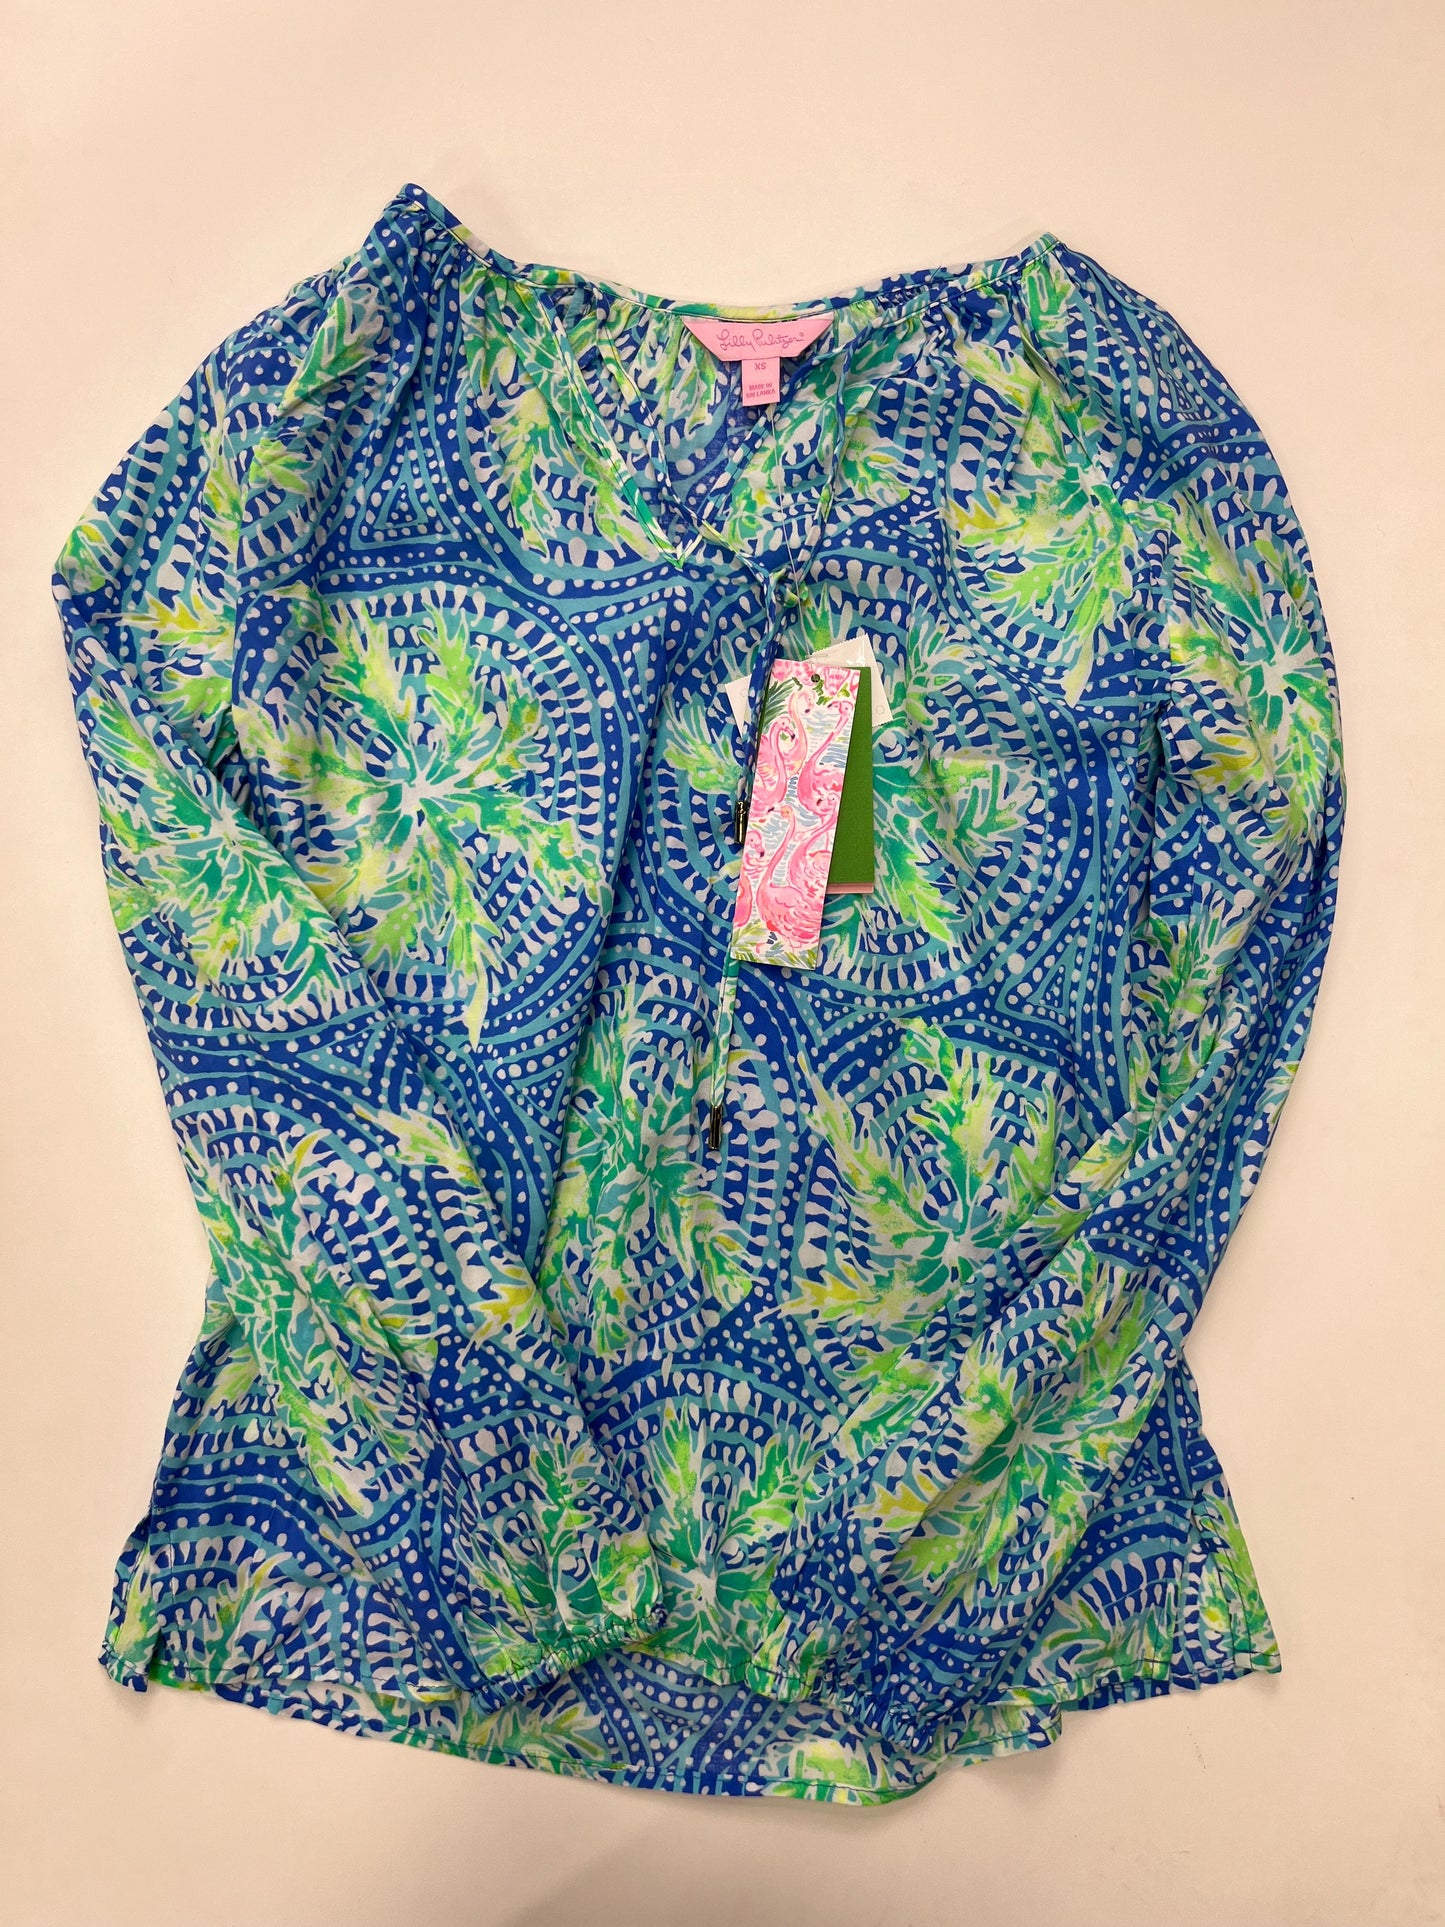 Multi-colored Blouse Long Sleeve Lilly Pulitzer NWT, Size Xs